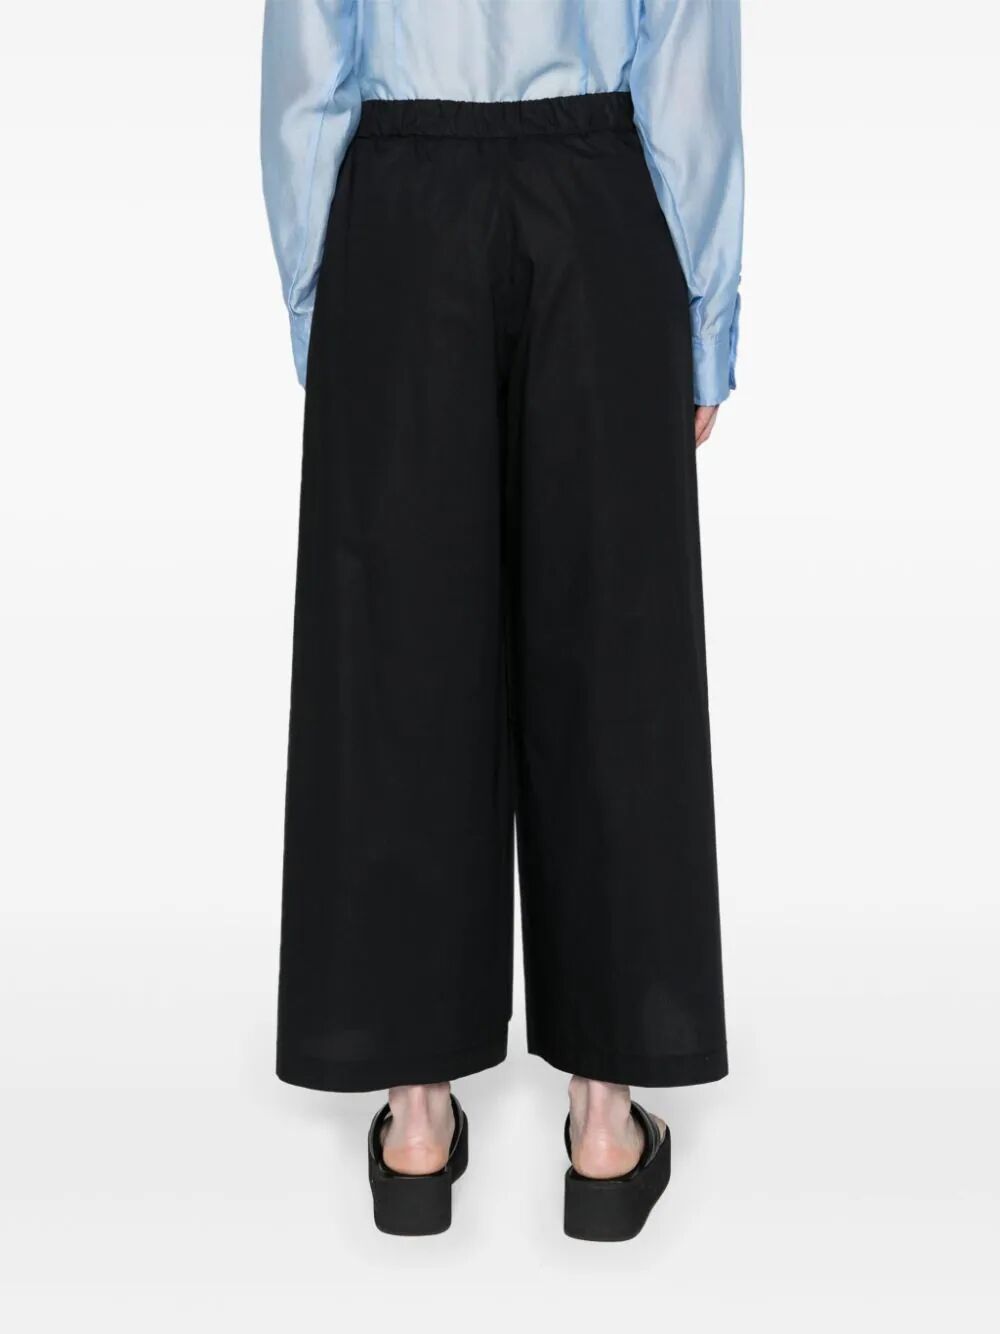 Black wide cropped trousers